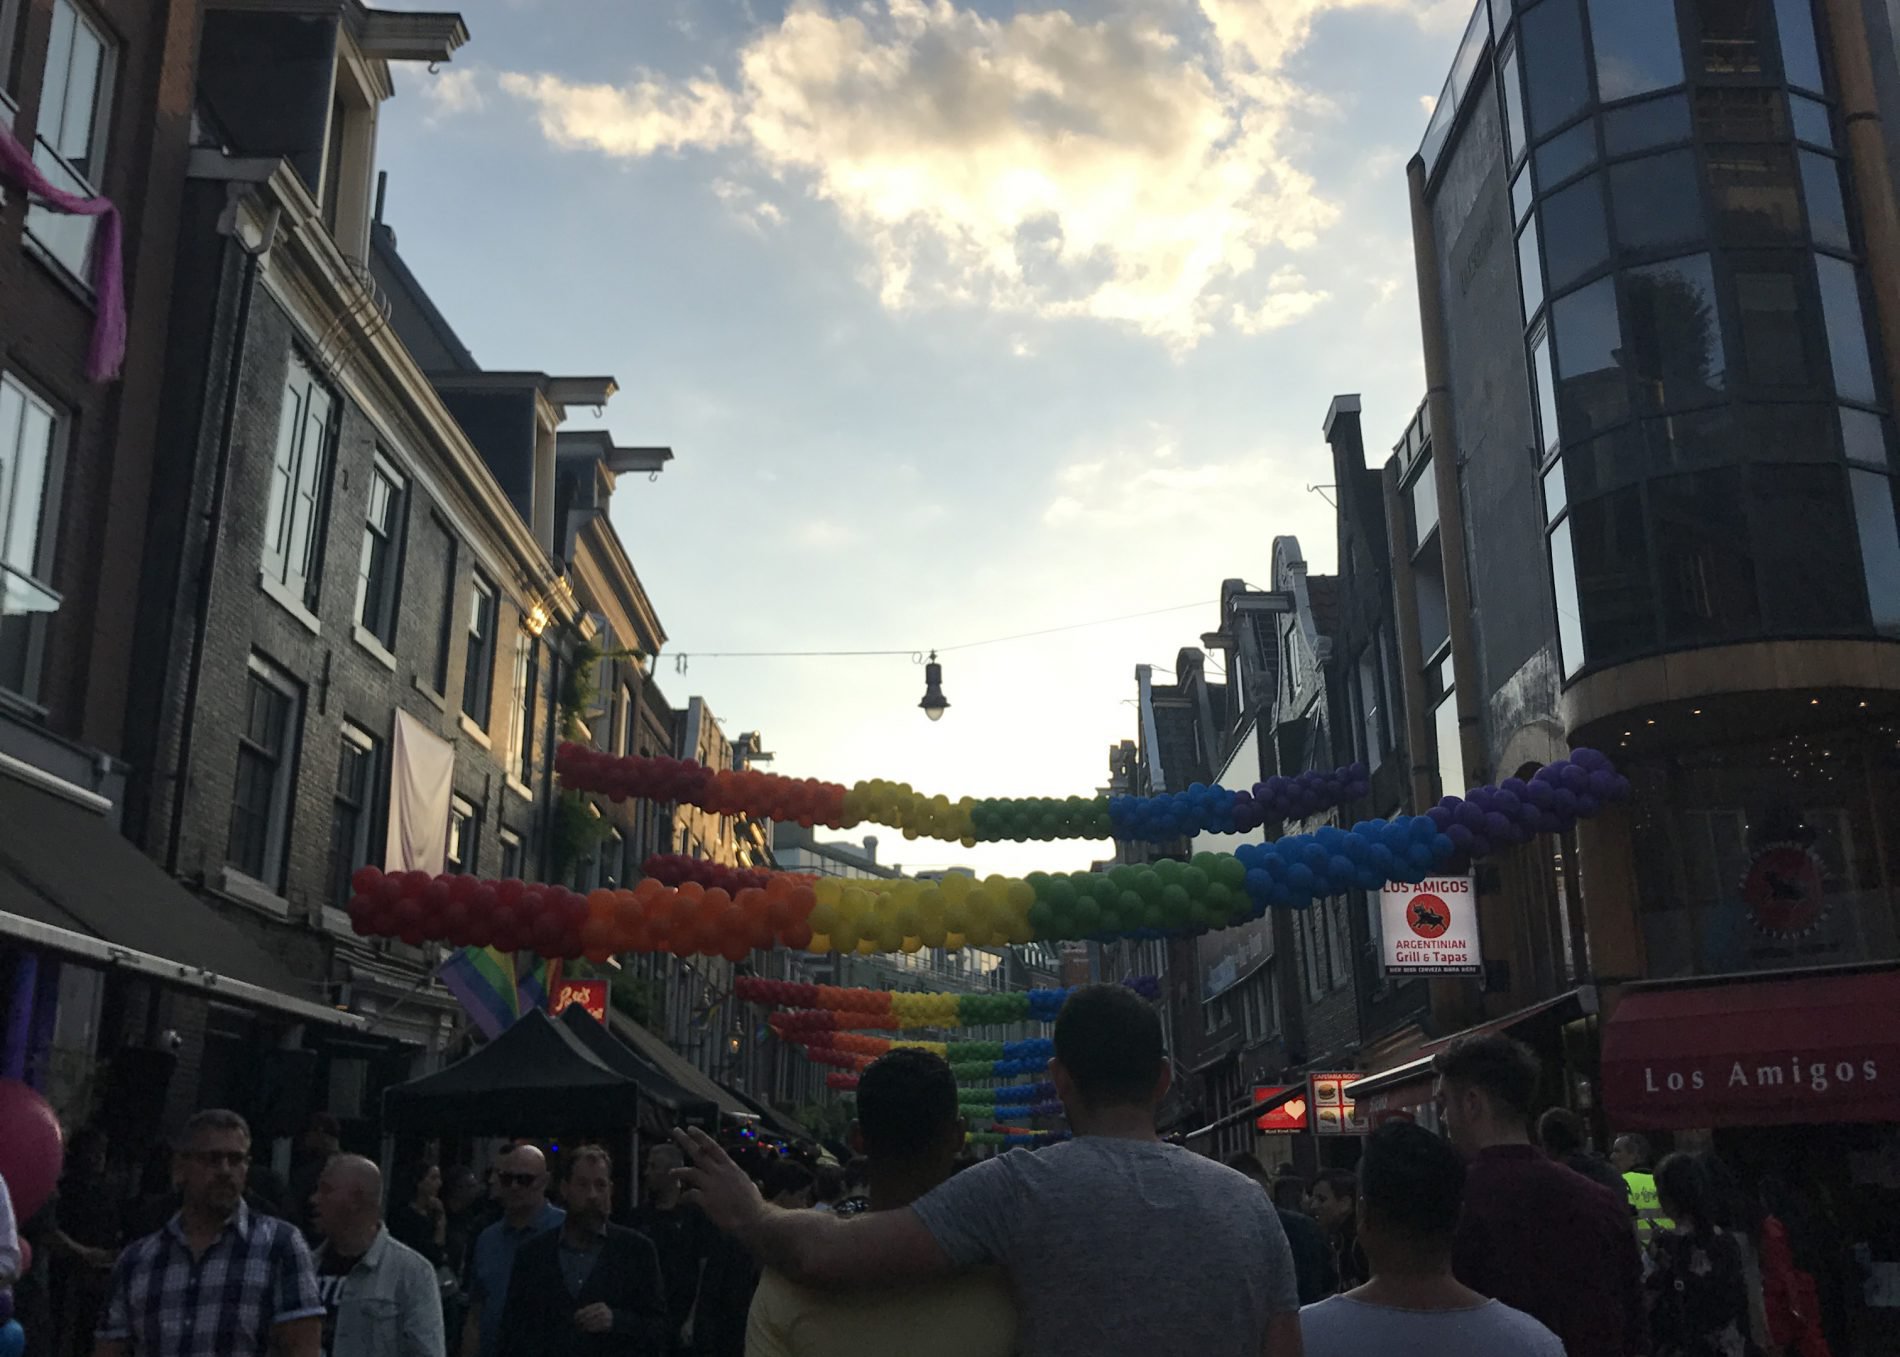 A last minute decision to go to Amsterdam because my friend made the World Cup semi-finals for England